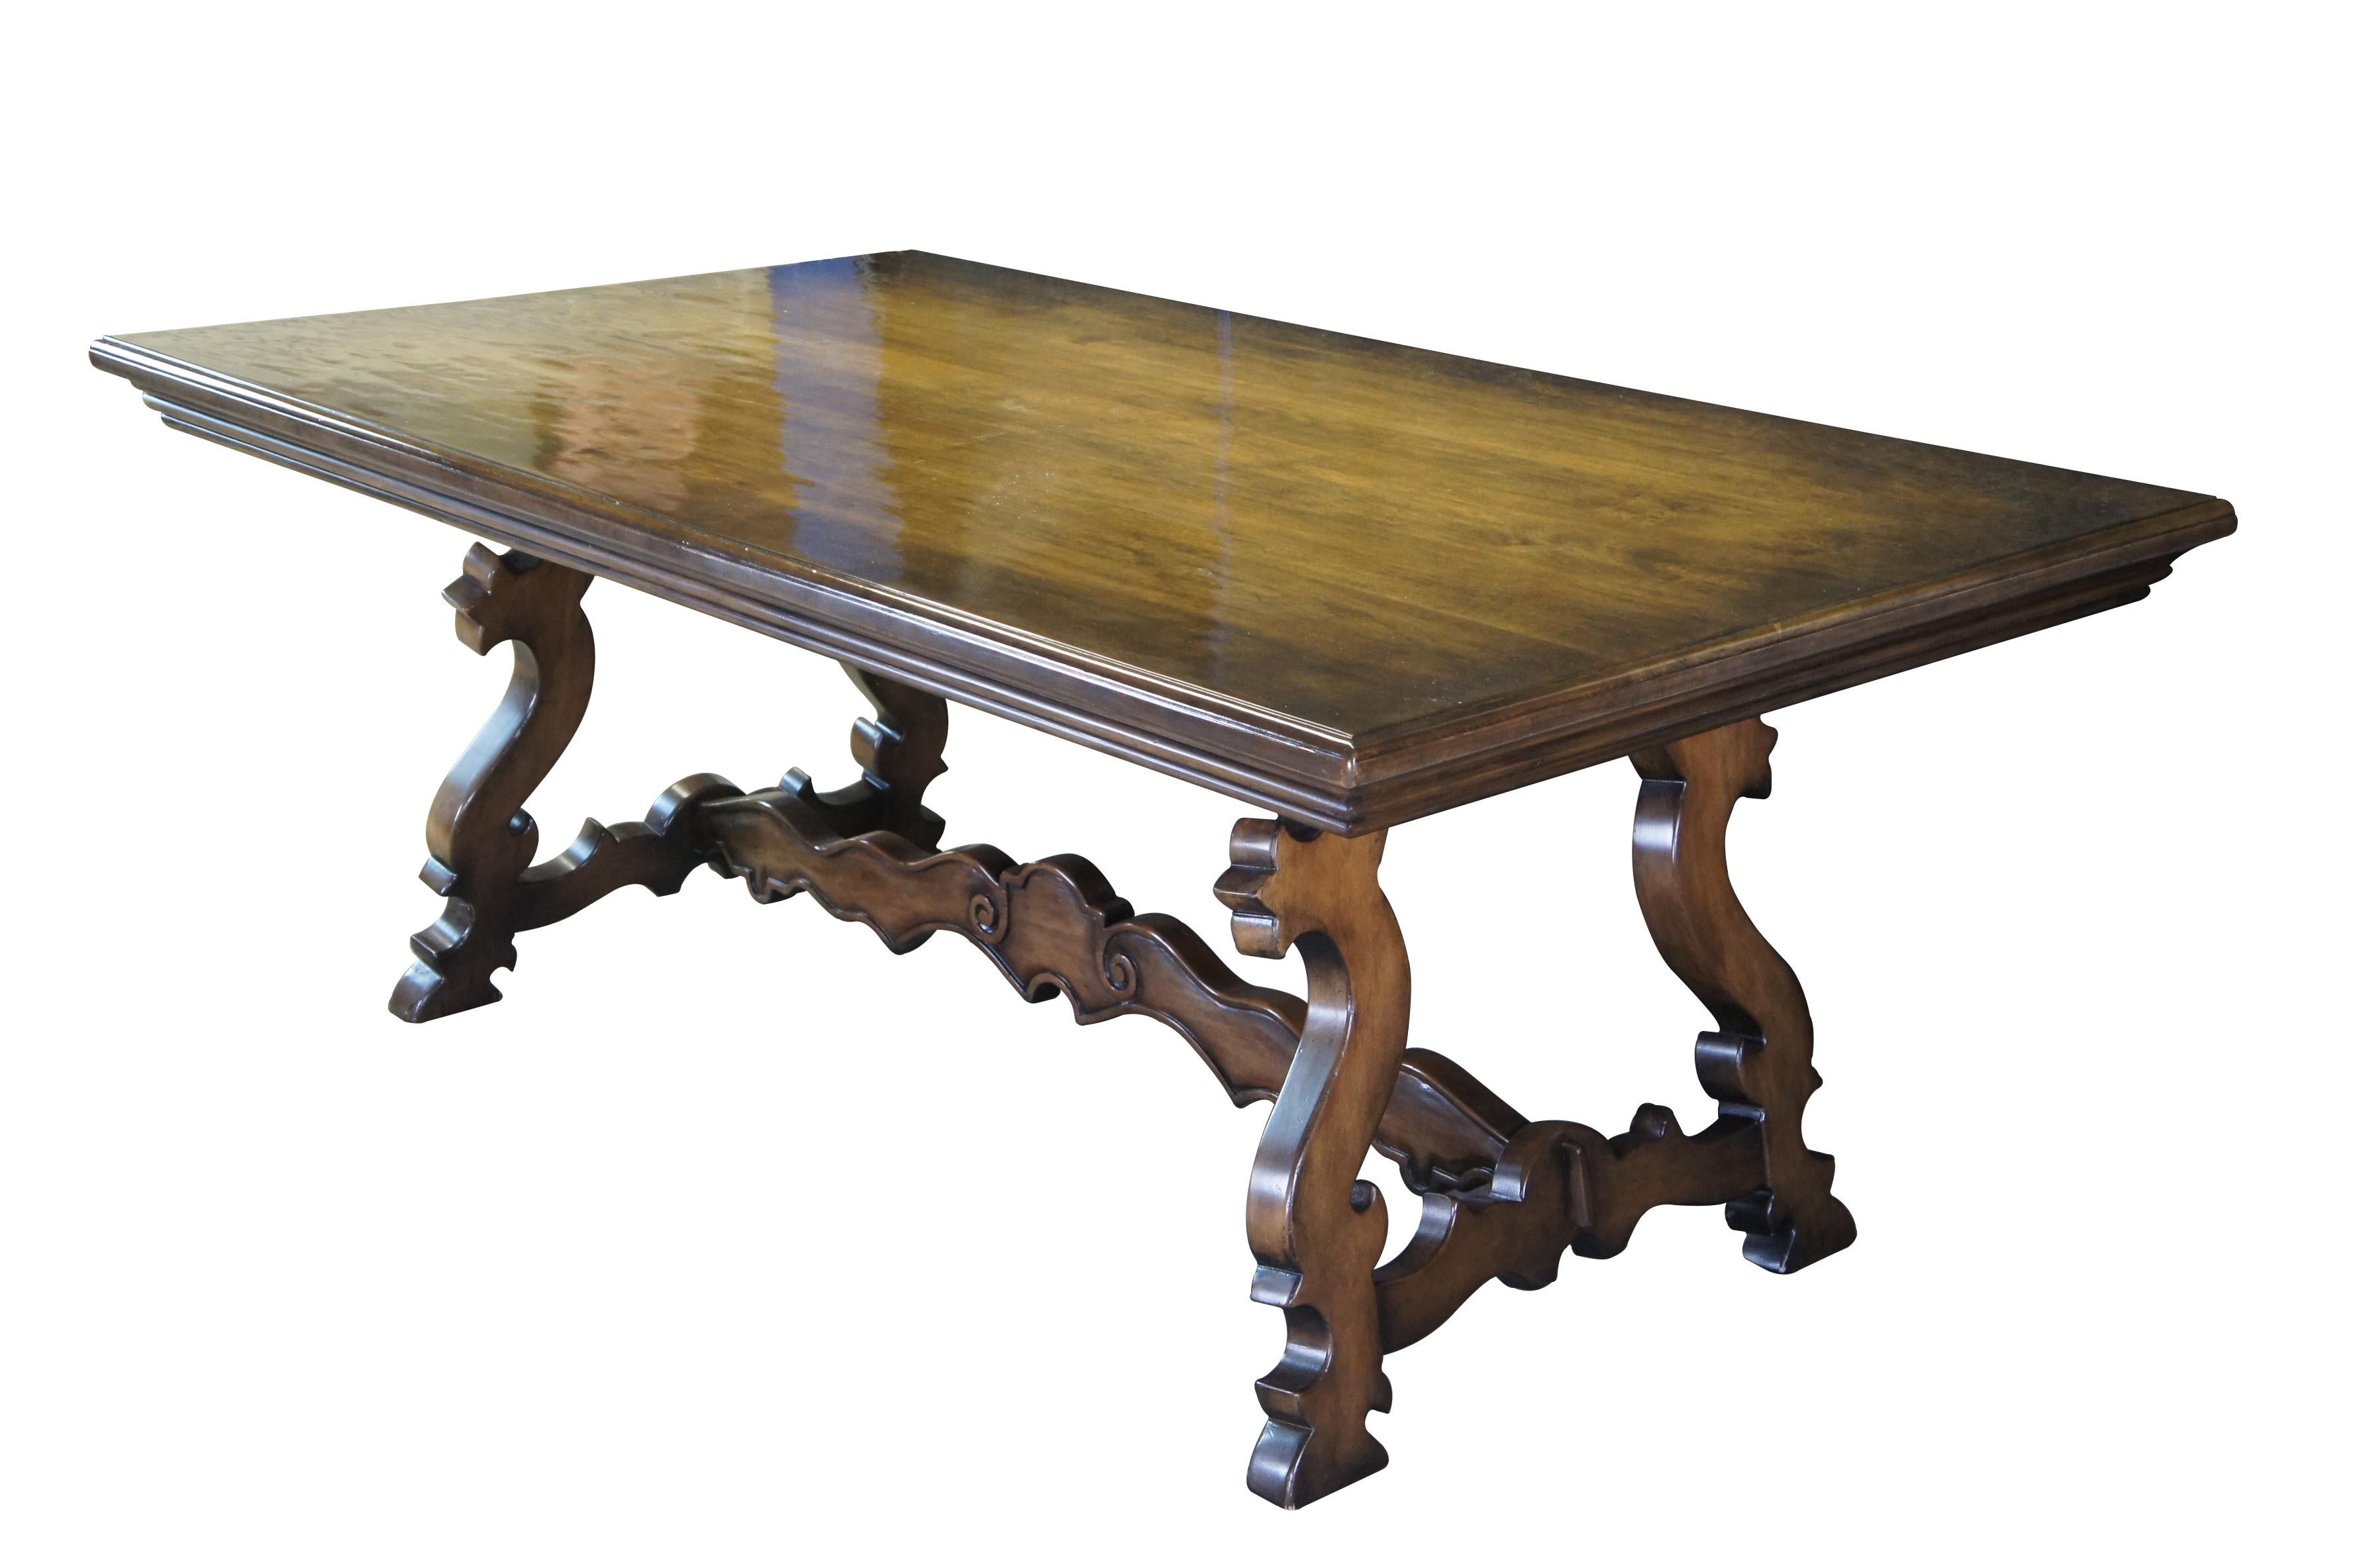 Spanish Colonial Vintage Spanish Revival Tuscan Walnut Old World Trestle Dining Breakfast Table For Sale